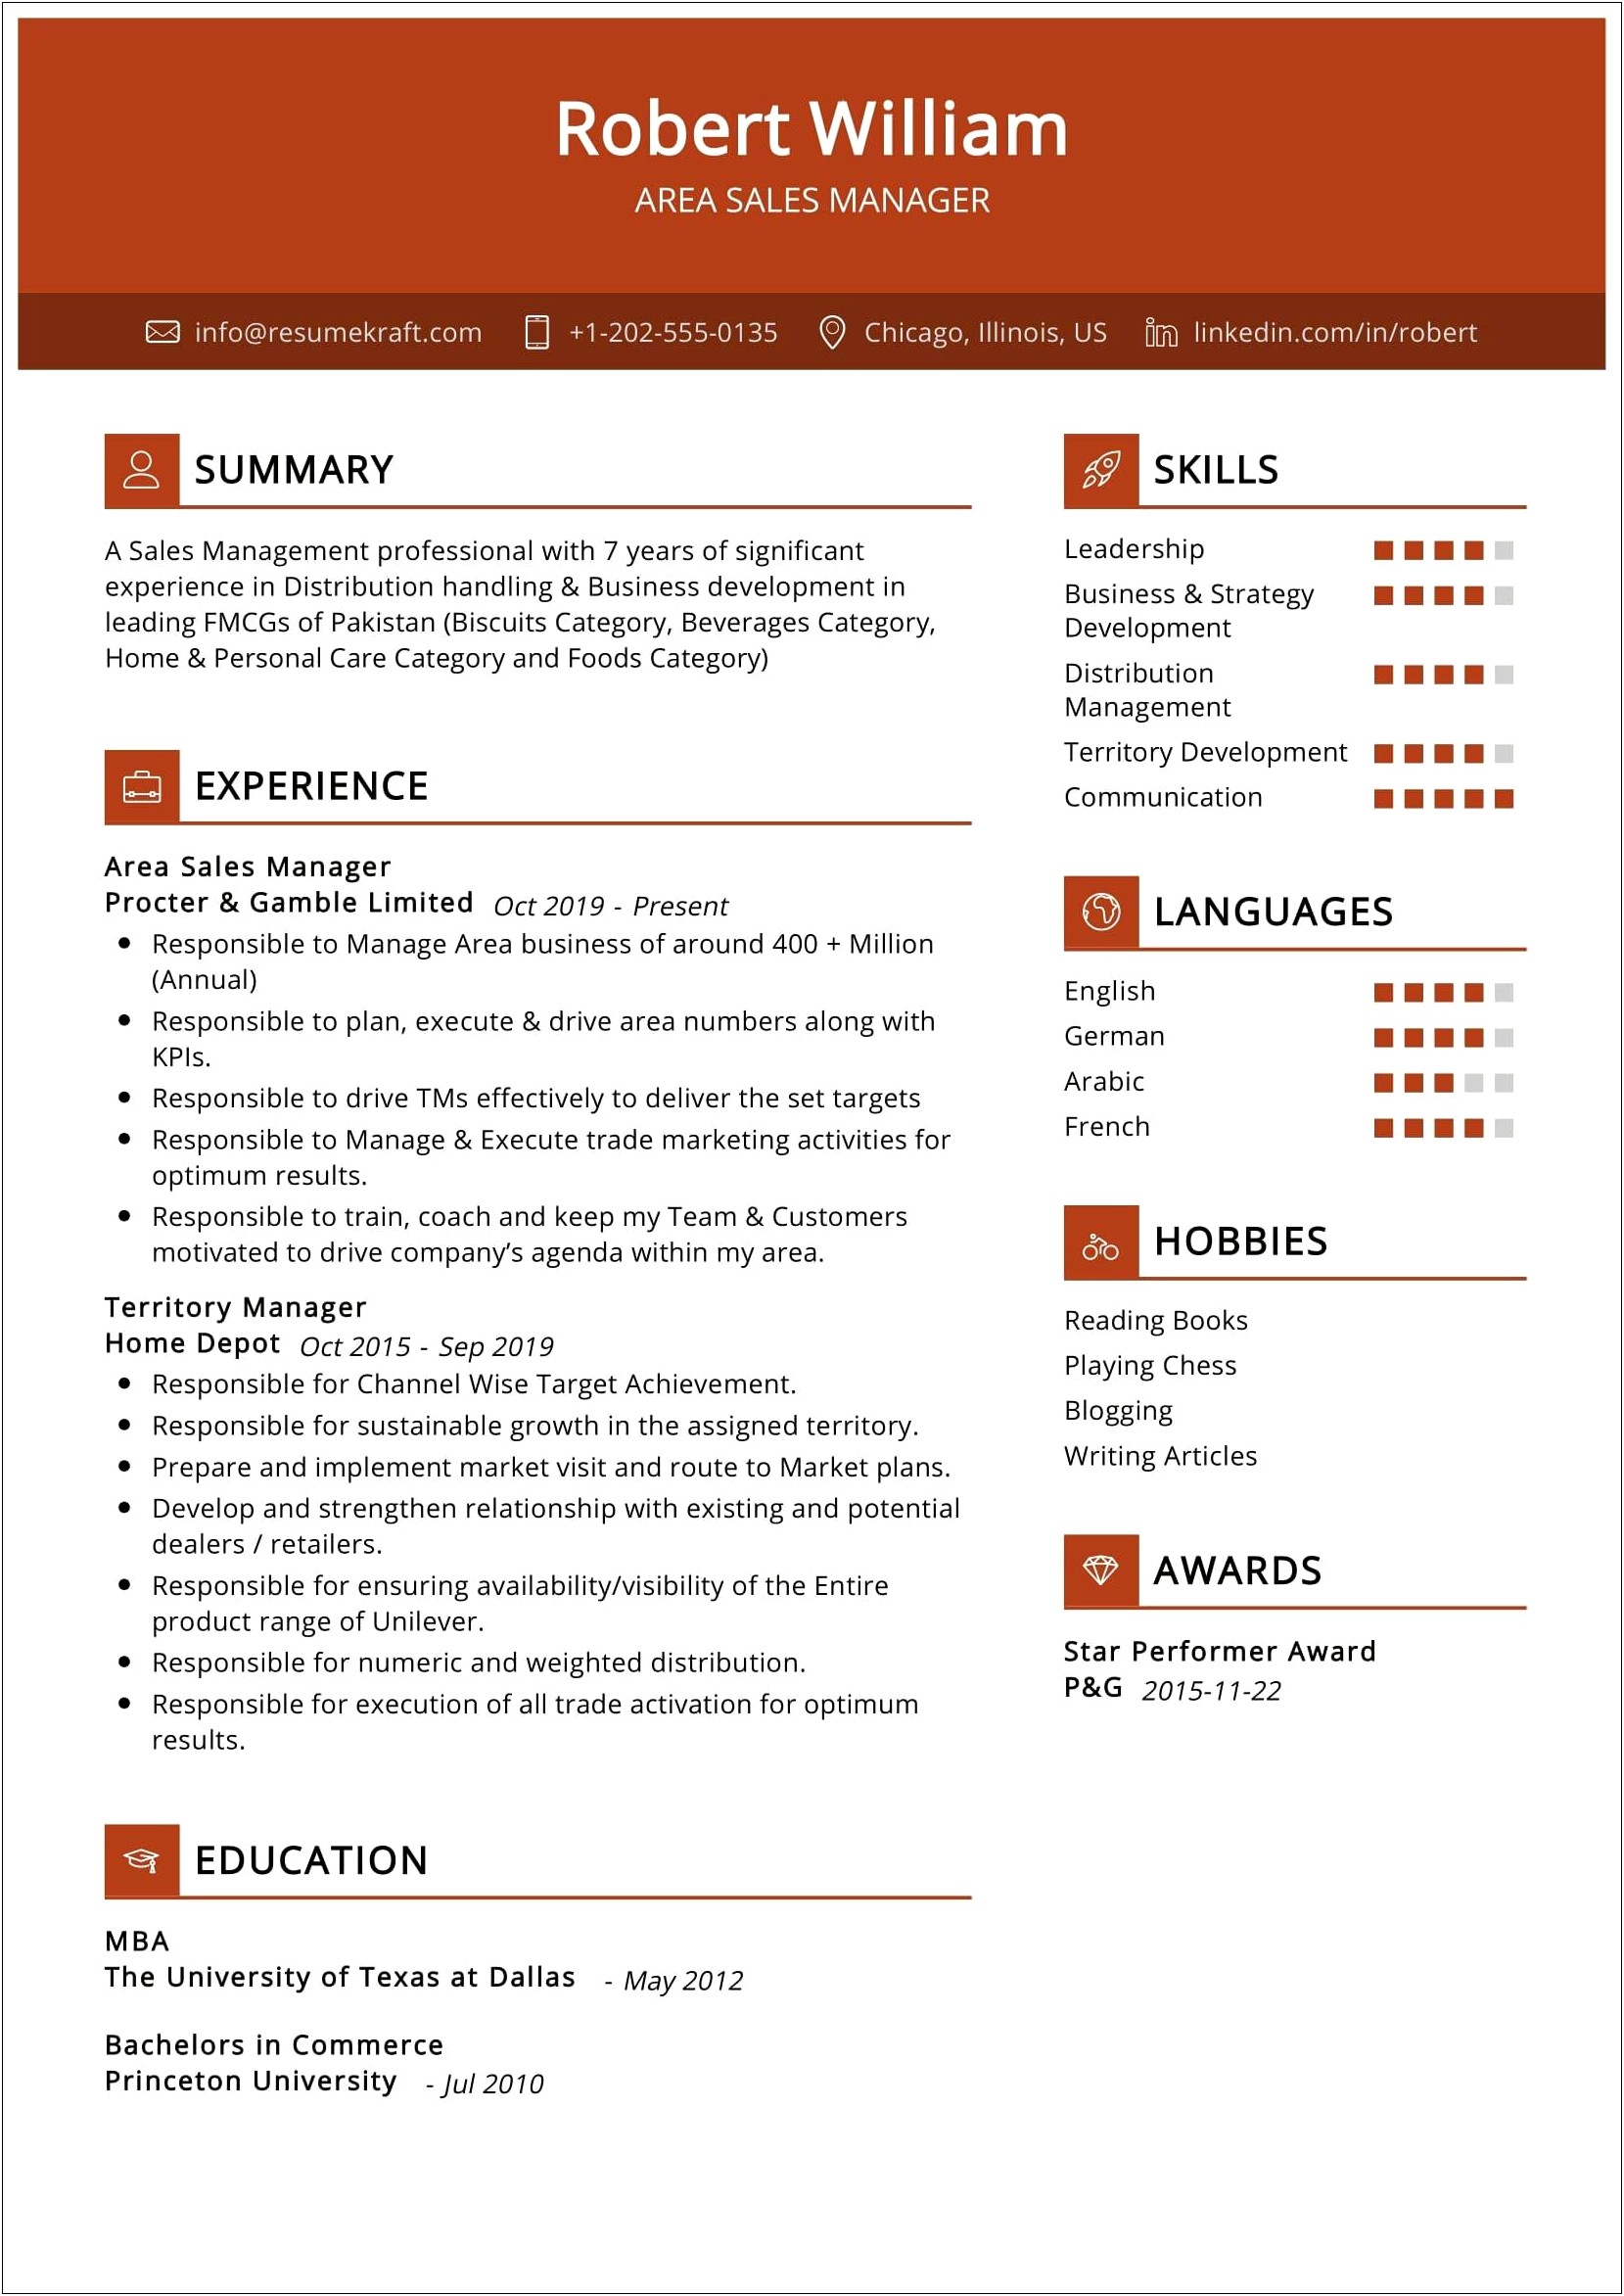 Regional Sales Manager Resume For Fmcg